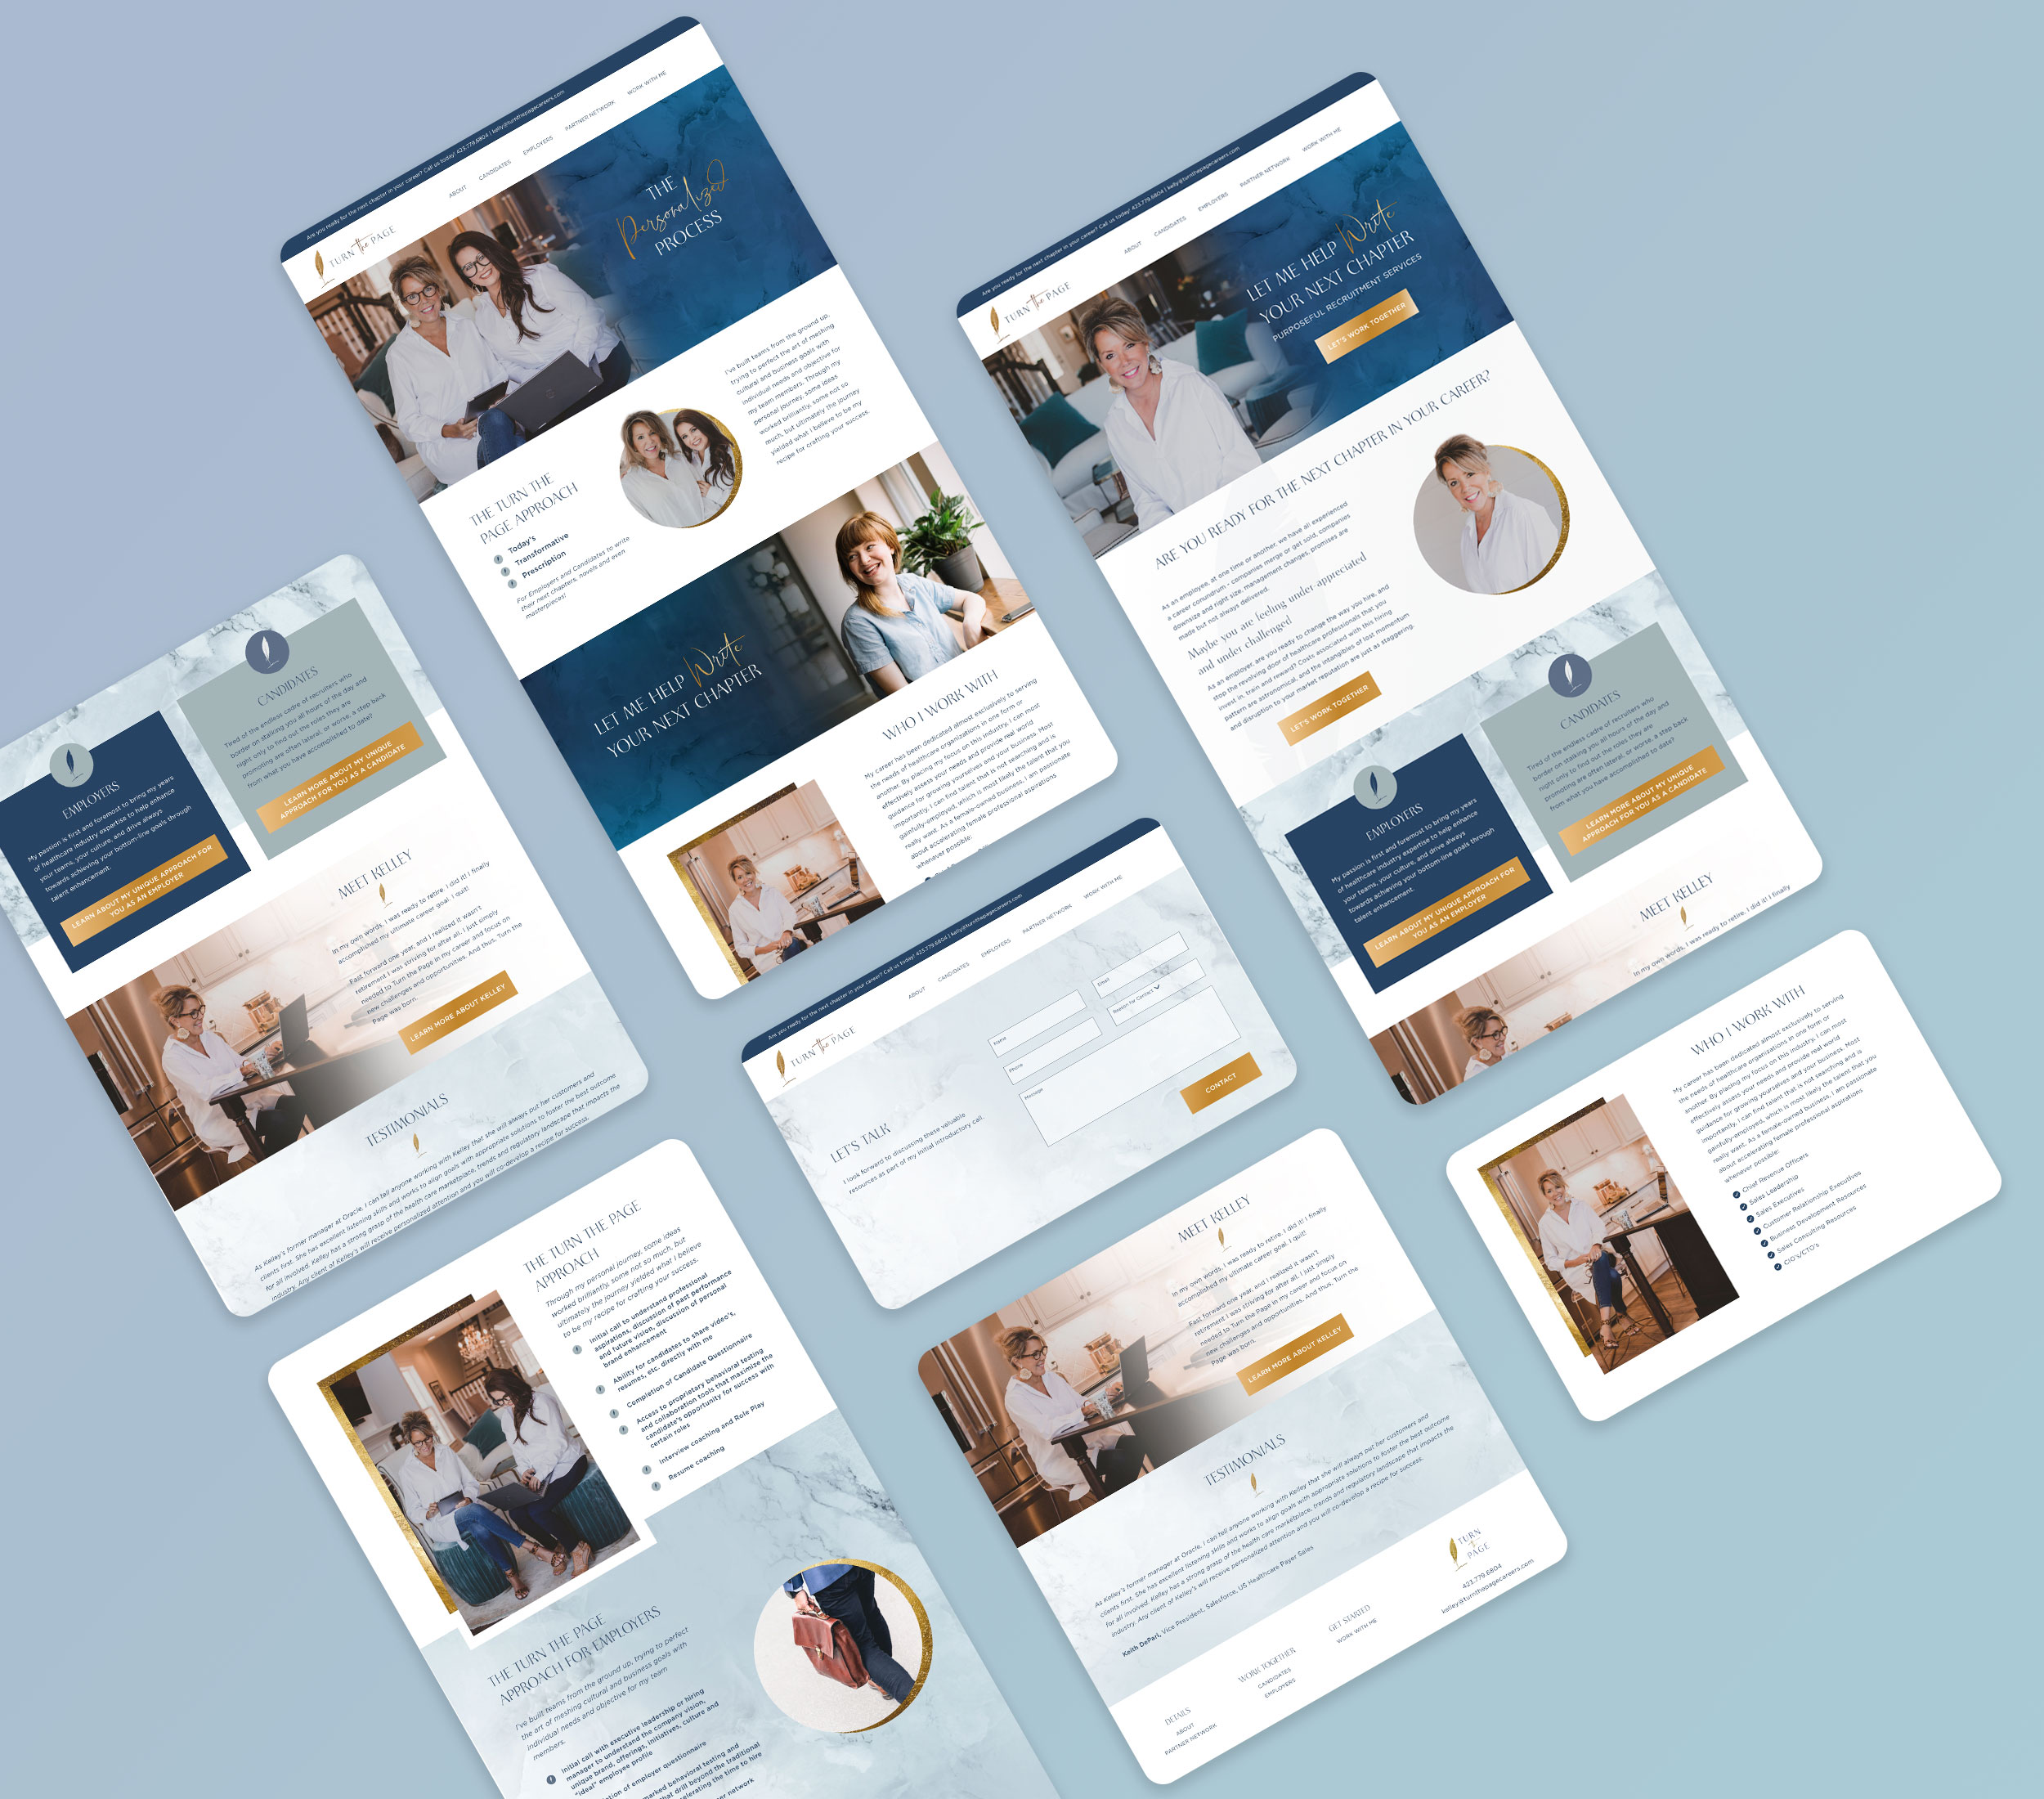 Turn the Page Careers | Website Design for Recruiter | Nicole Victory Design